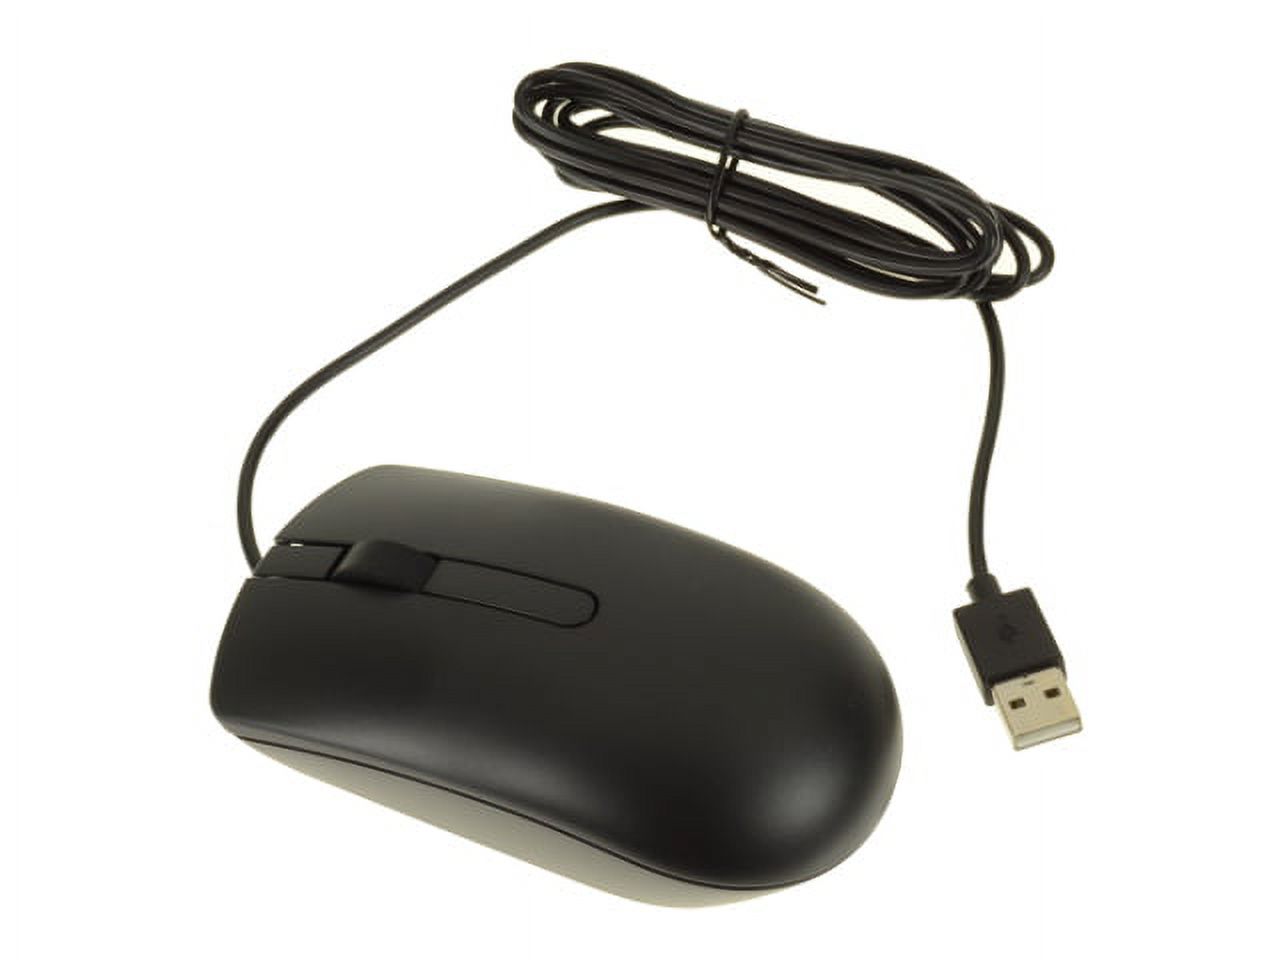 Dell Optical DP/N 009NK2 USB Wired Scroll Mouse Black BRAND NEW SEALED - image 4 of 4